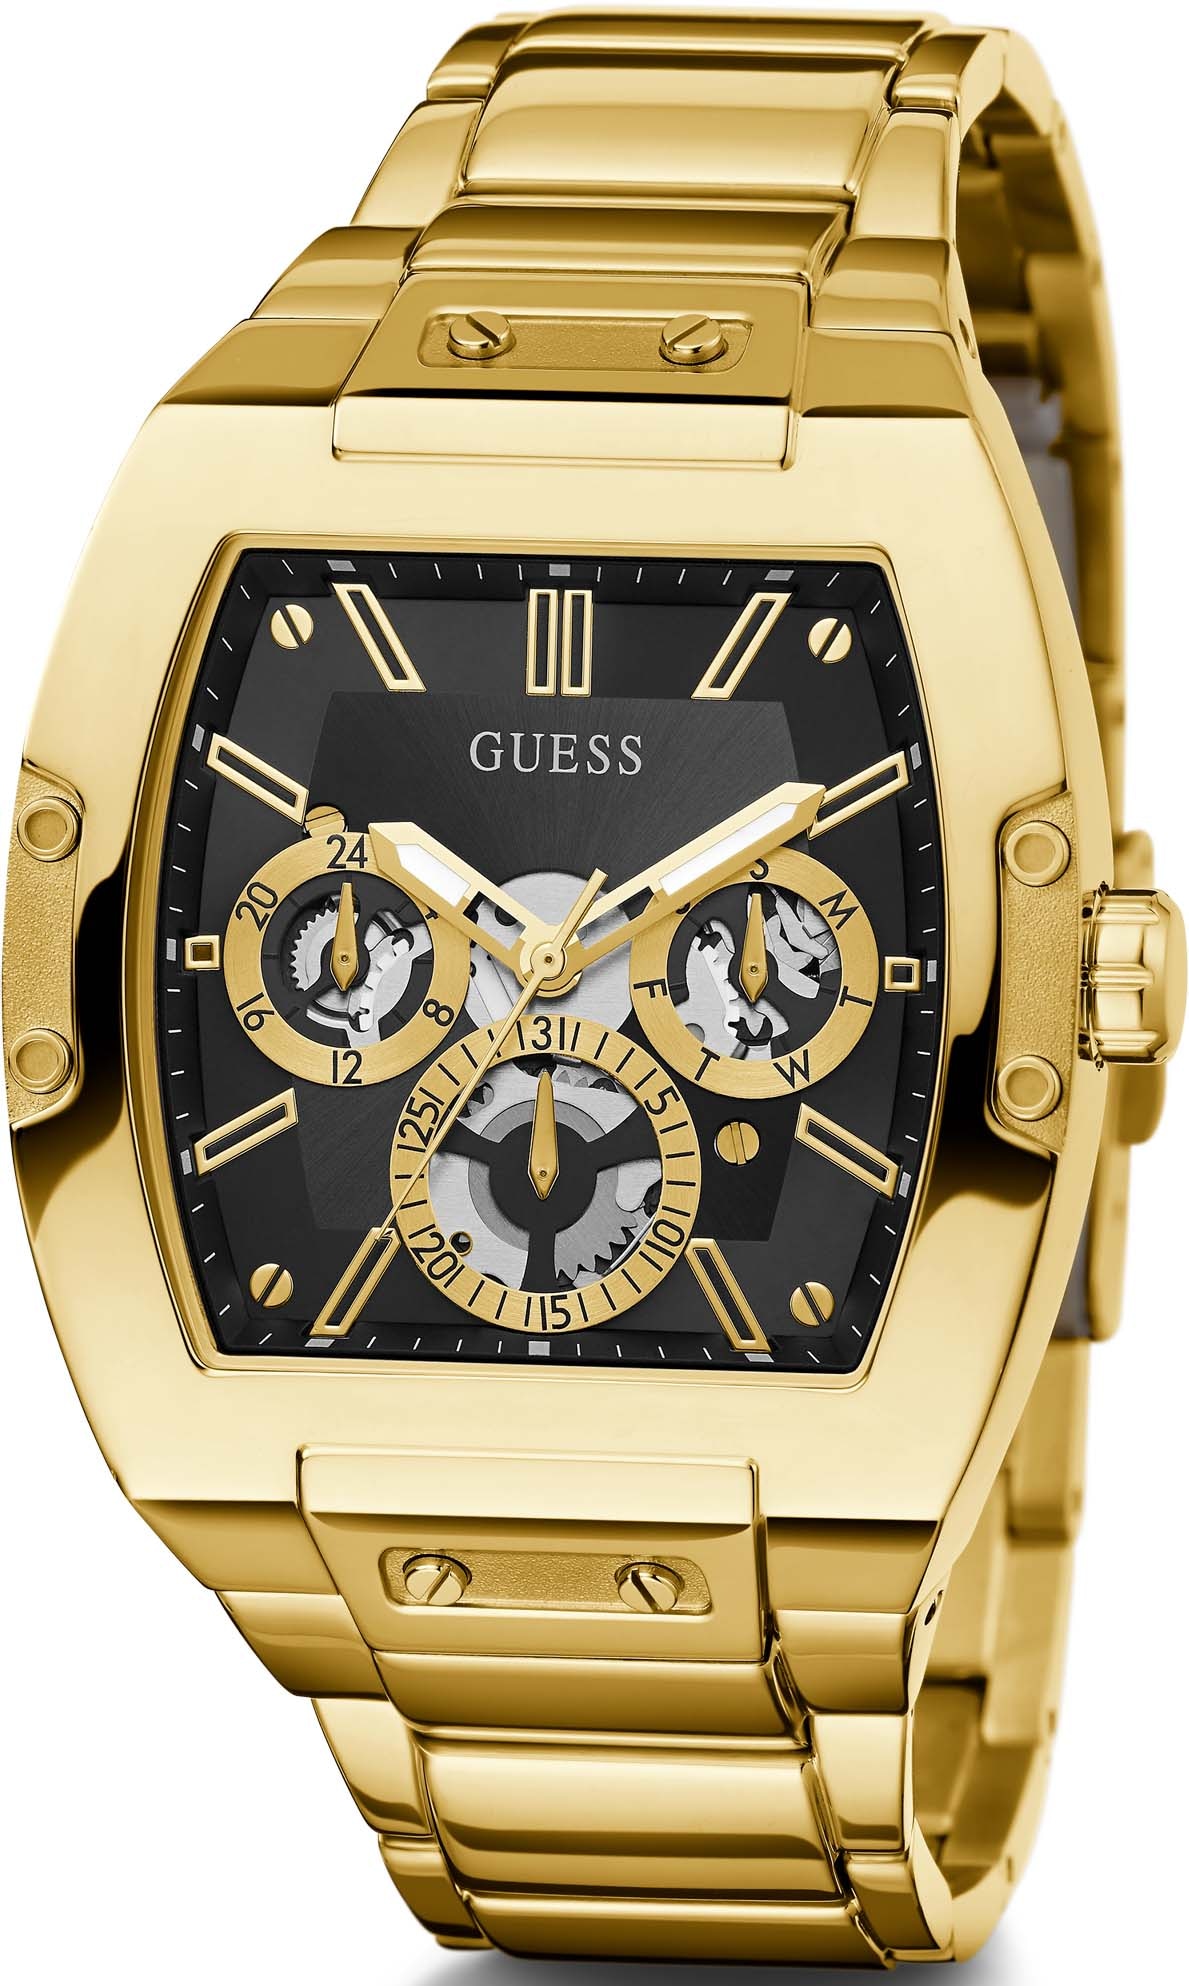 Guess Multifunktionsuhr »GW0456G1« bei ♕